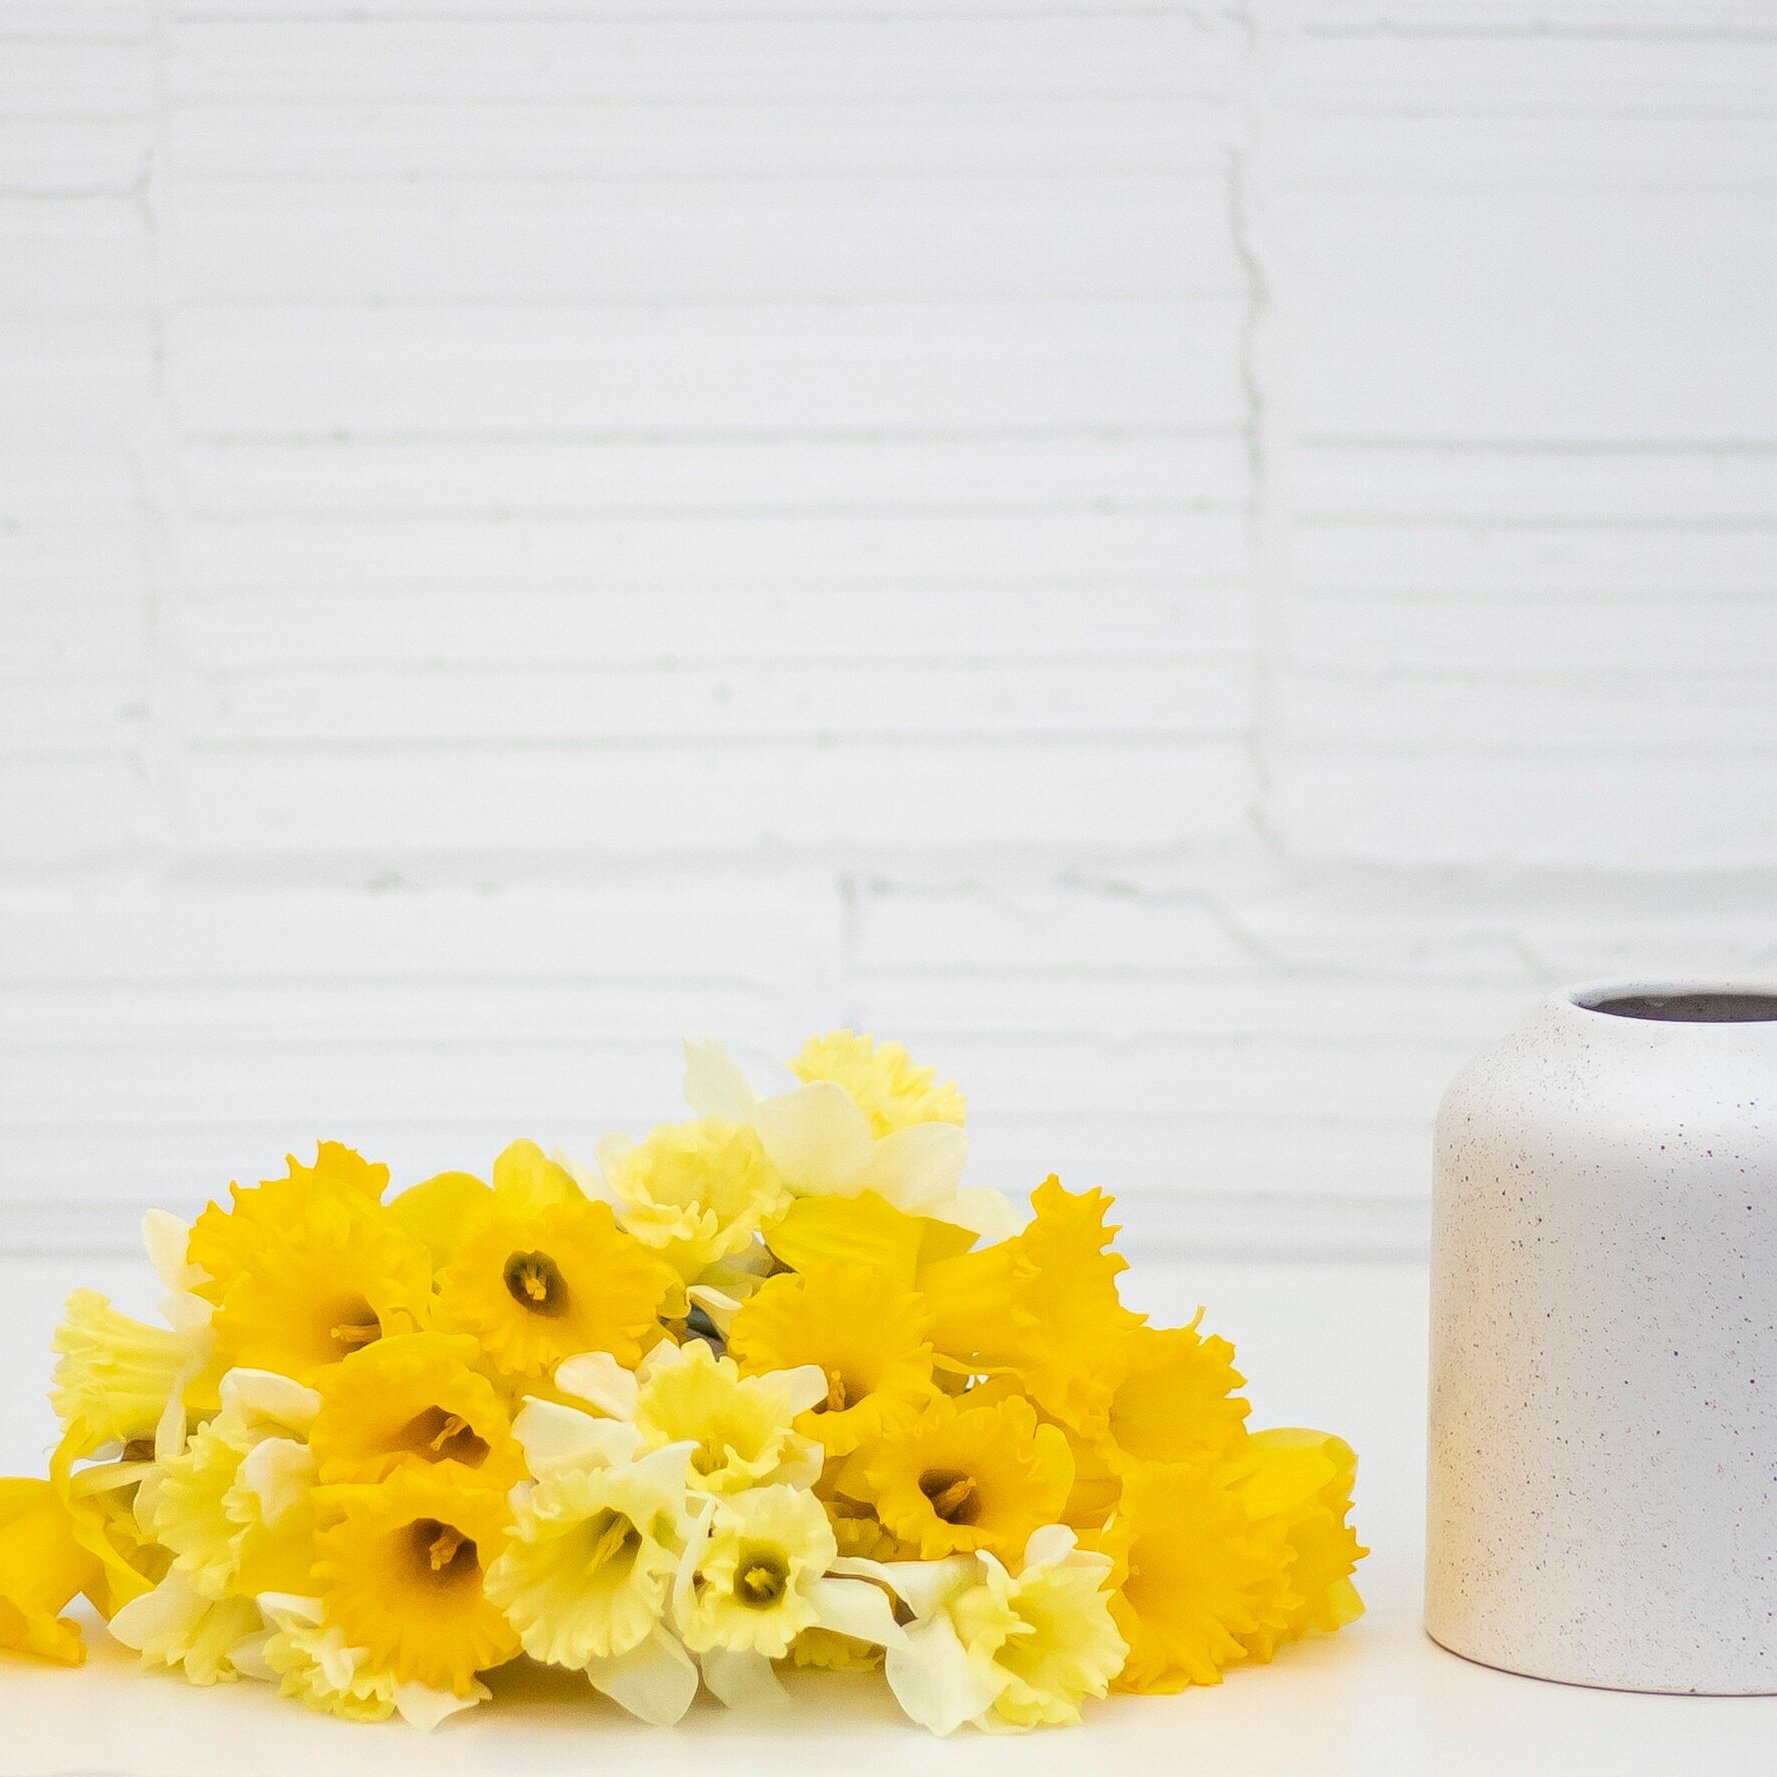 Multiple stems of yellow daffodils laying down on a white table, with a white vase standing beside it